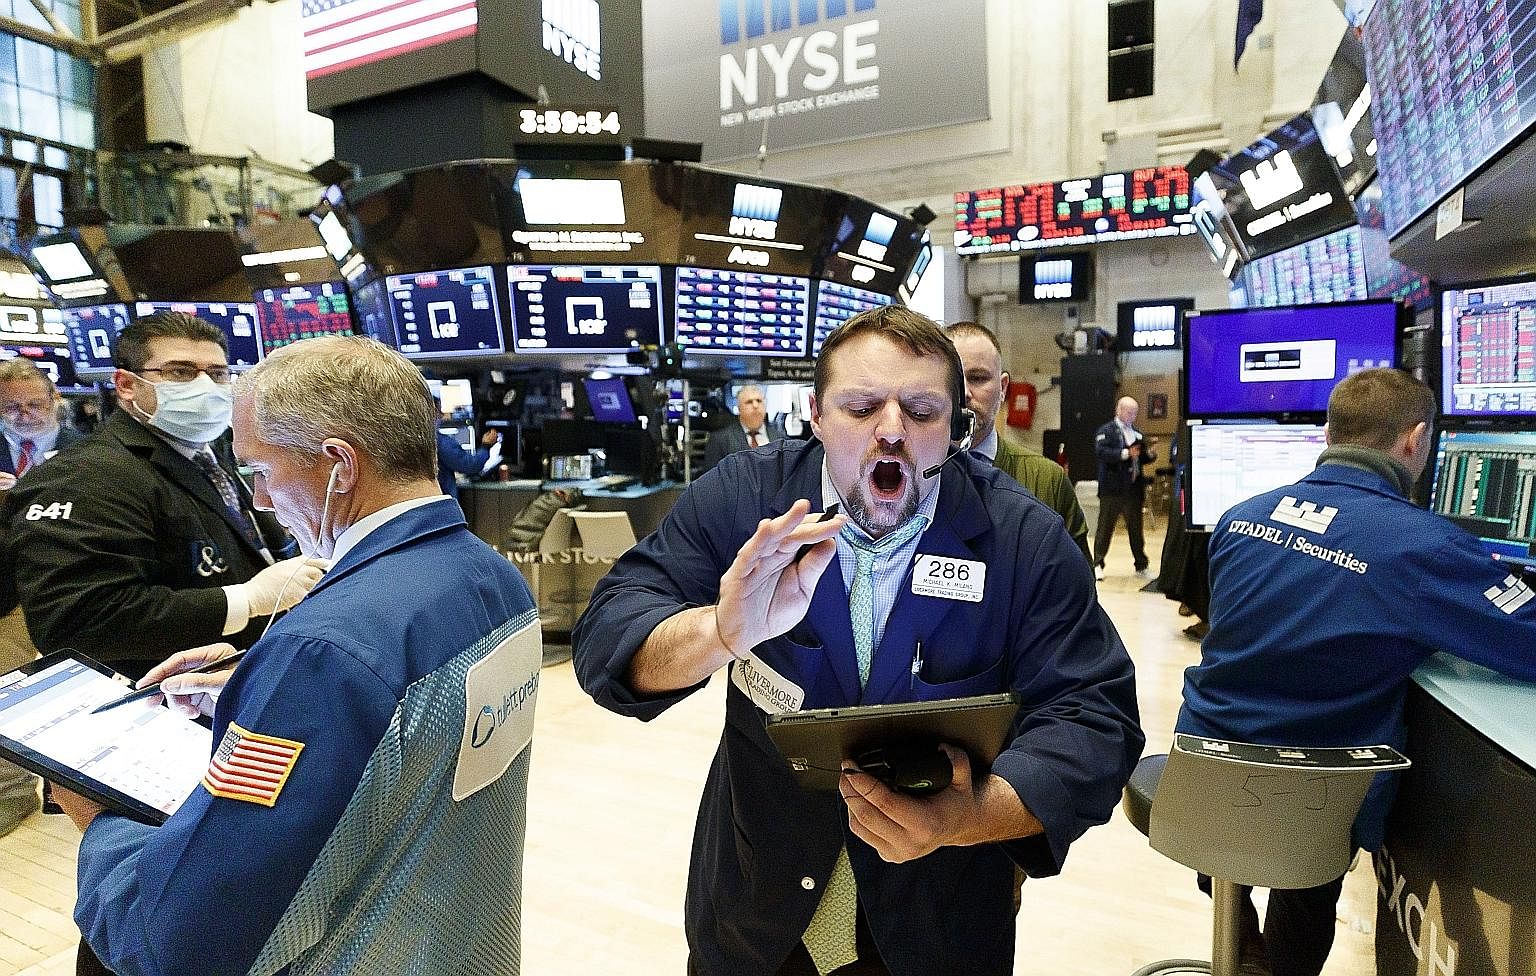 Traders on the floor of the New York Stock Exchange. While much of Asia is healing, the worst could be yet to come for Europe and the Americas. Incoherent and uncoordinated policy approaches to disease management have seen the US overtake China and I